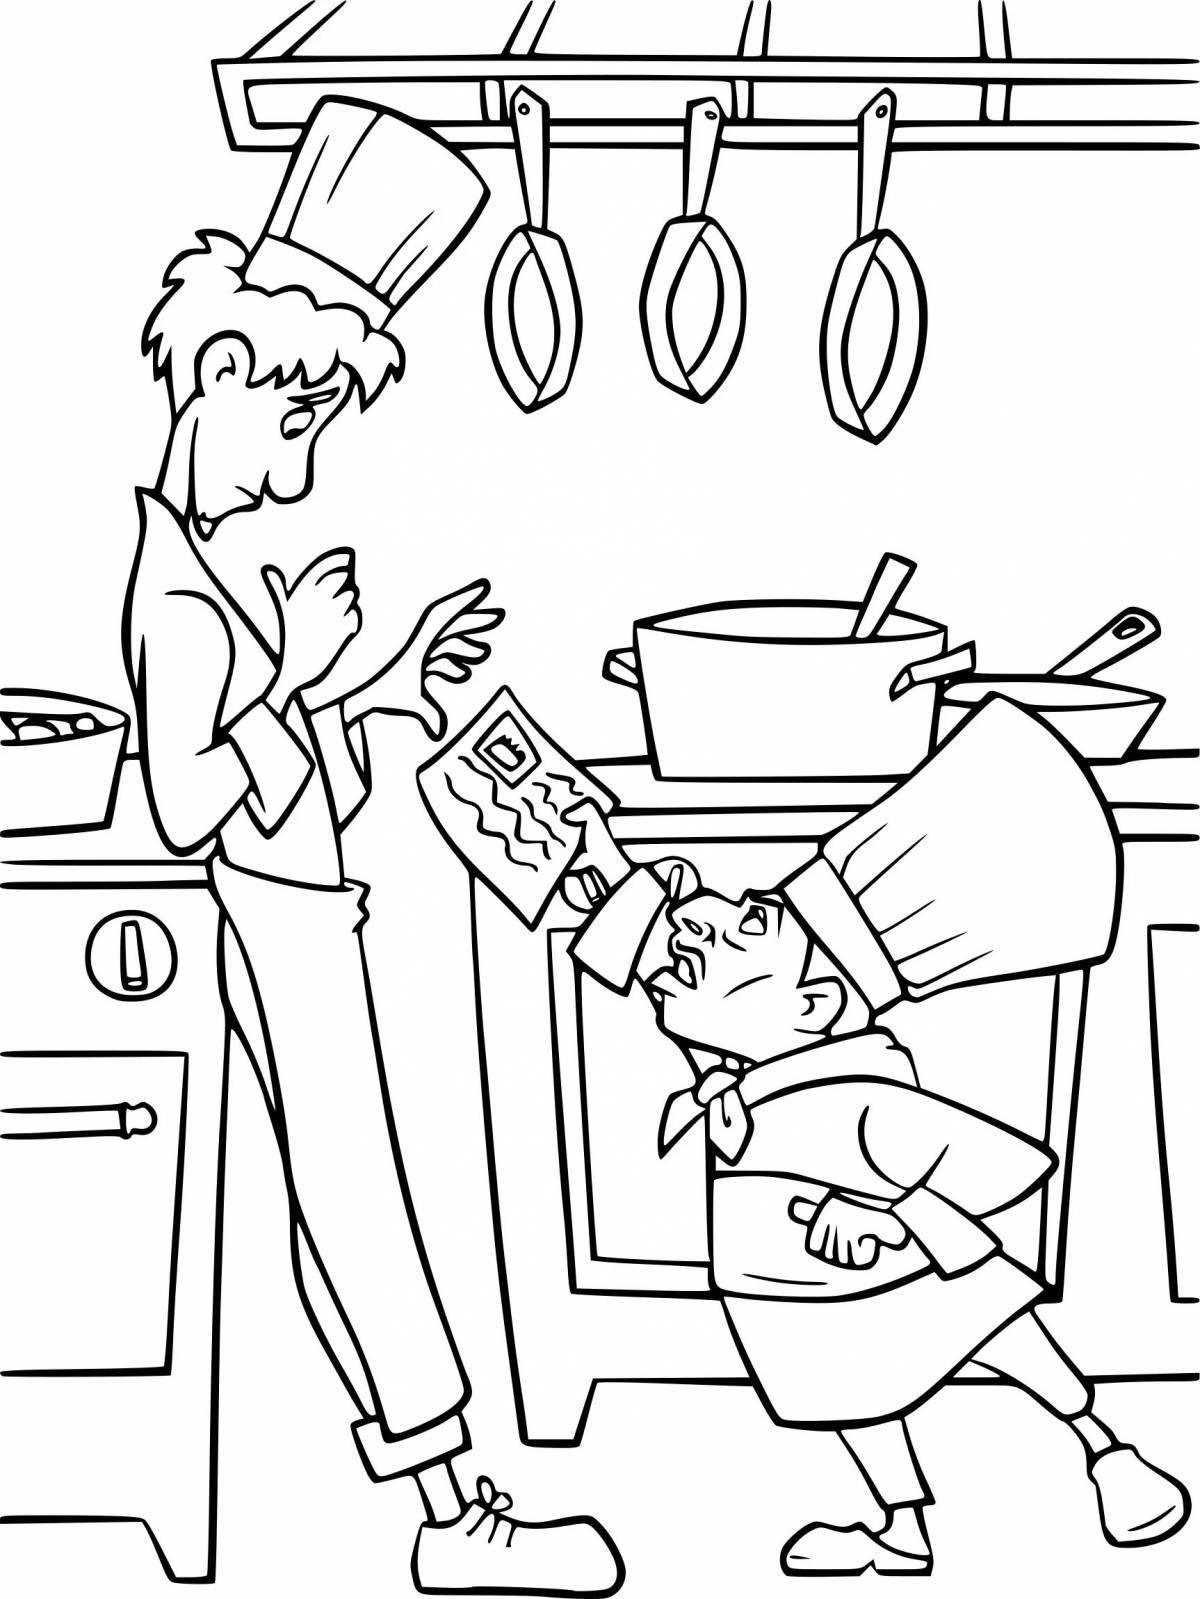 Playful etiquette coloring page for kids